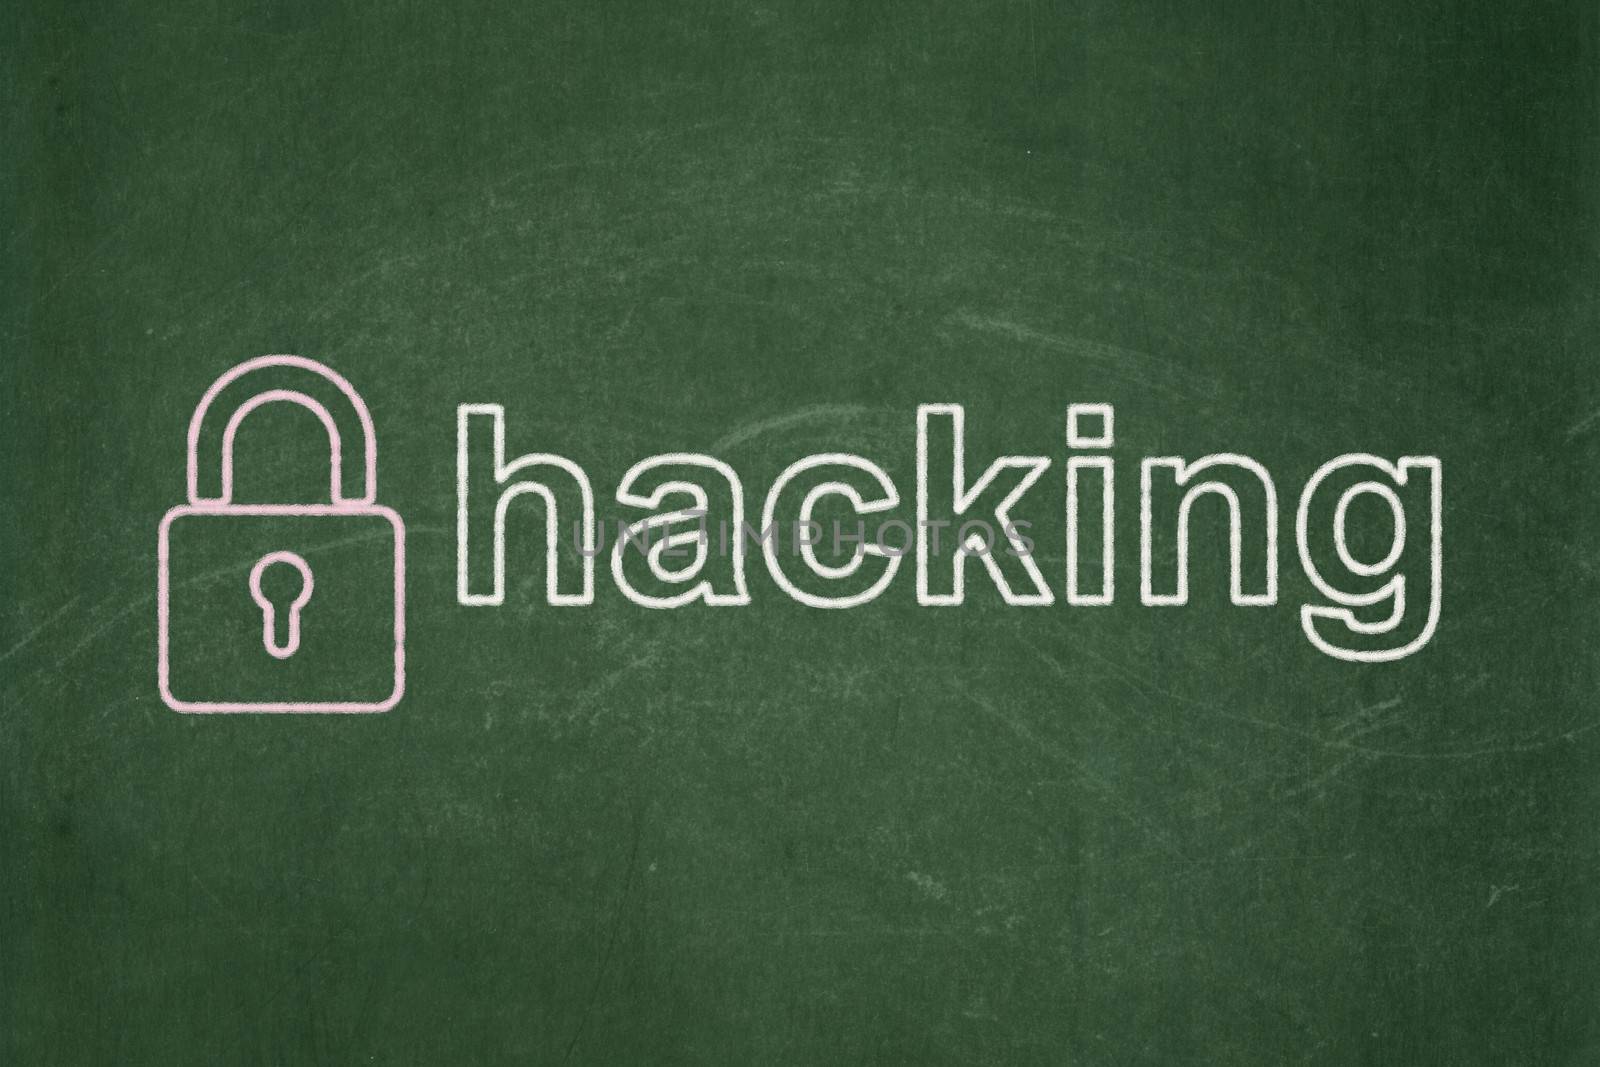 Safety concept: Closed Padlock icon and text Hacking on Green chalkboard background, 3d render